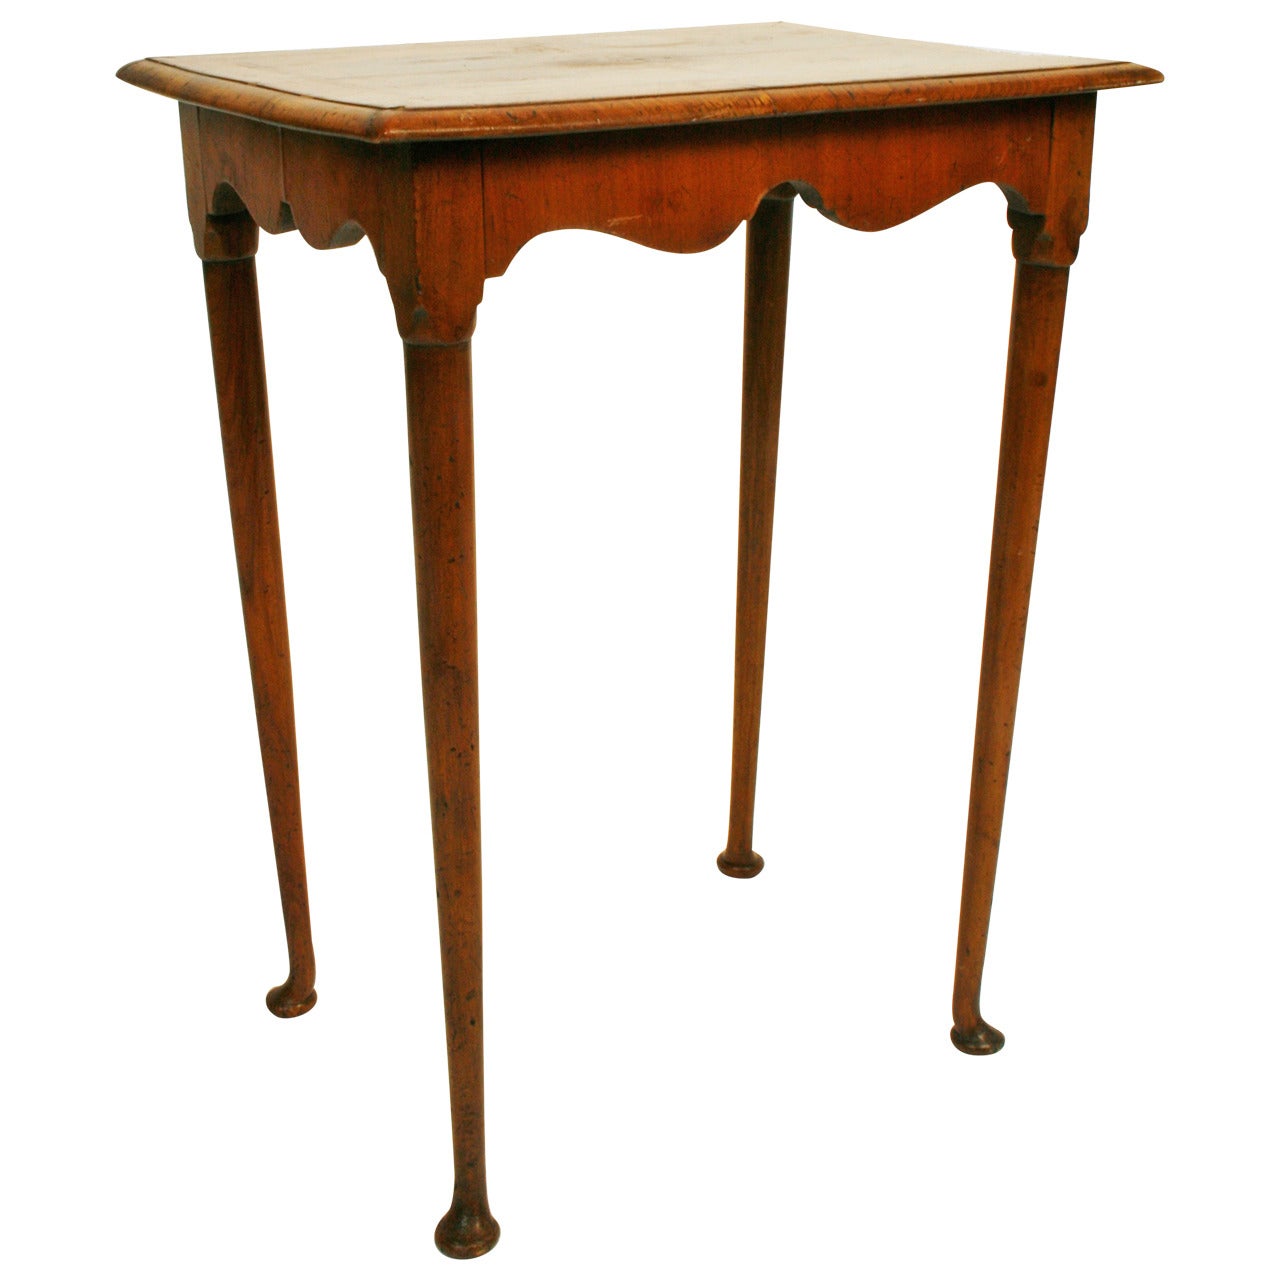 Queen Anne Style Burled Walnut Table, Late 19th Century